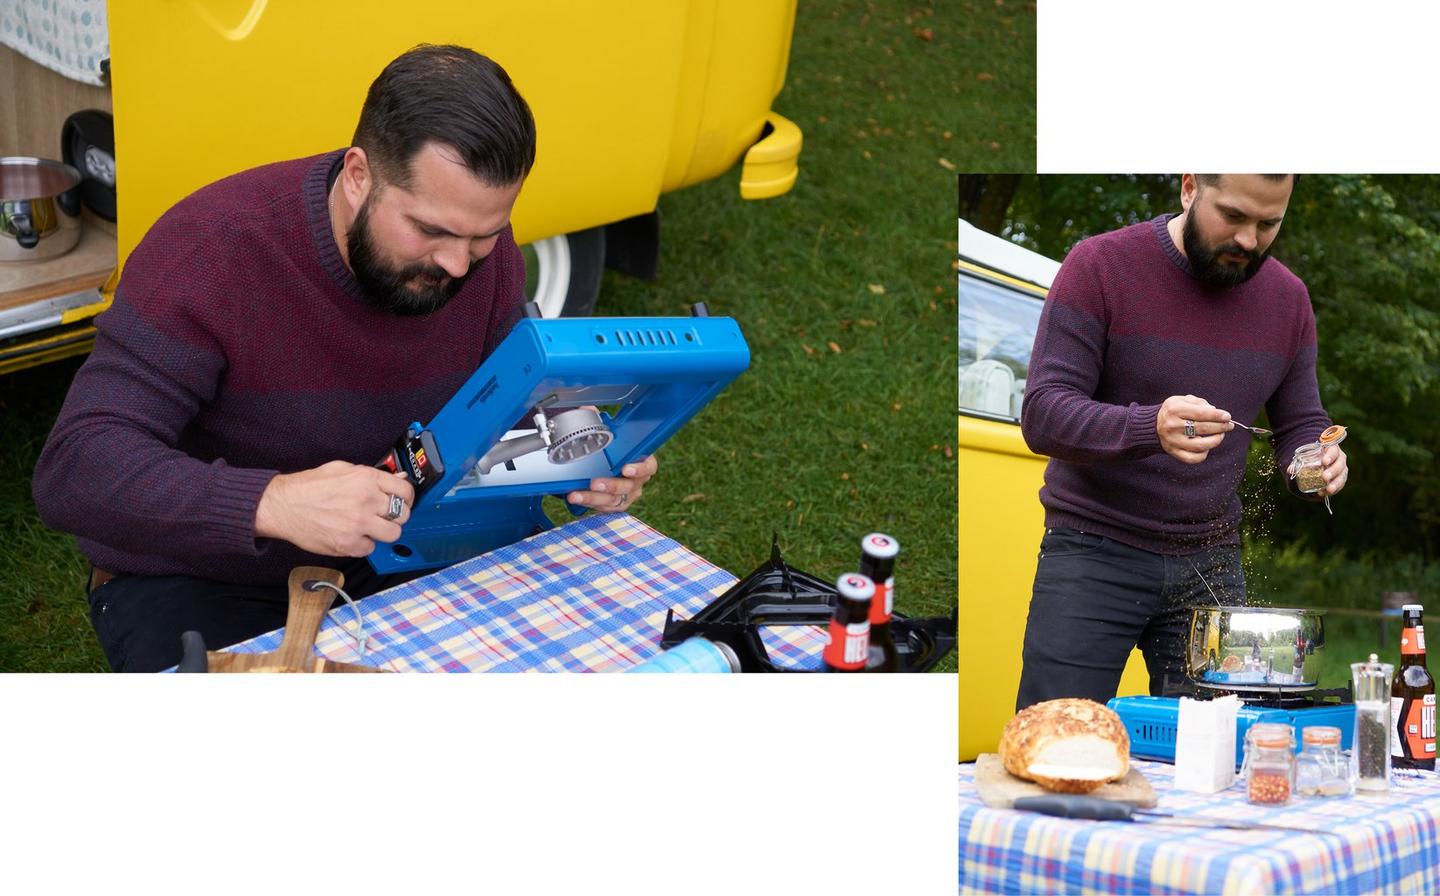 Dark haired male wearing a red jumper setting up a camping stove and second image of the same male sprinkling herbs into a saucepan